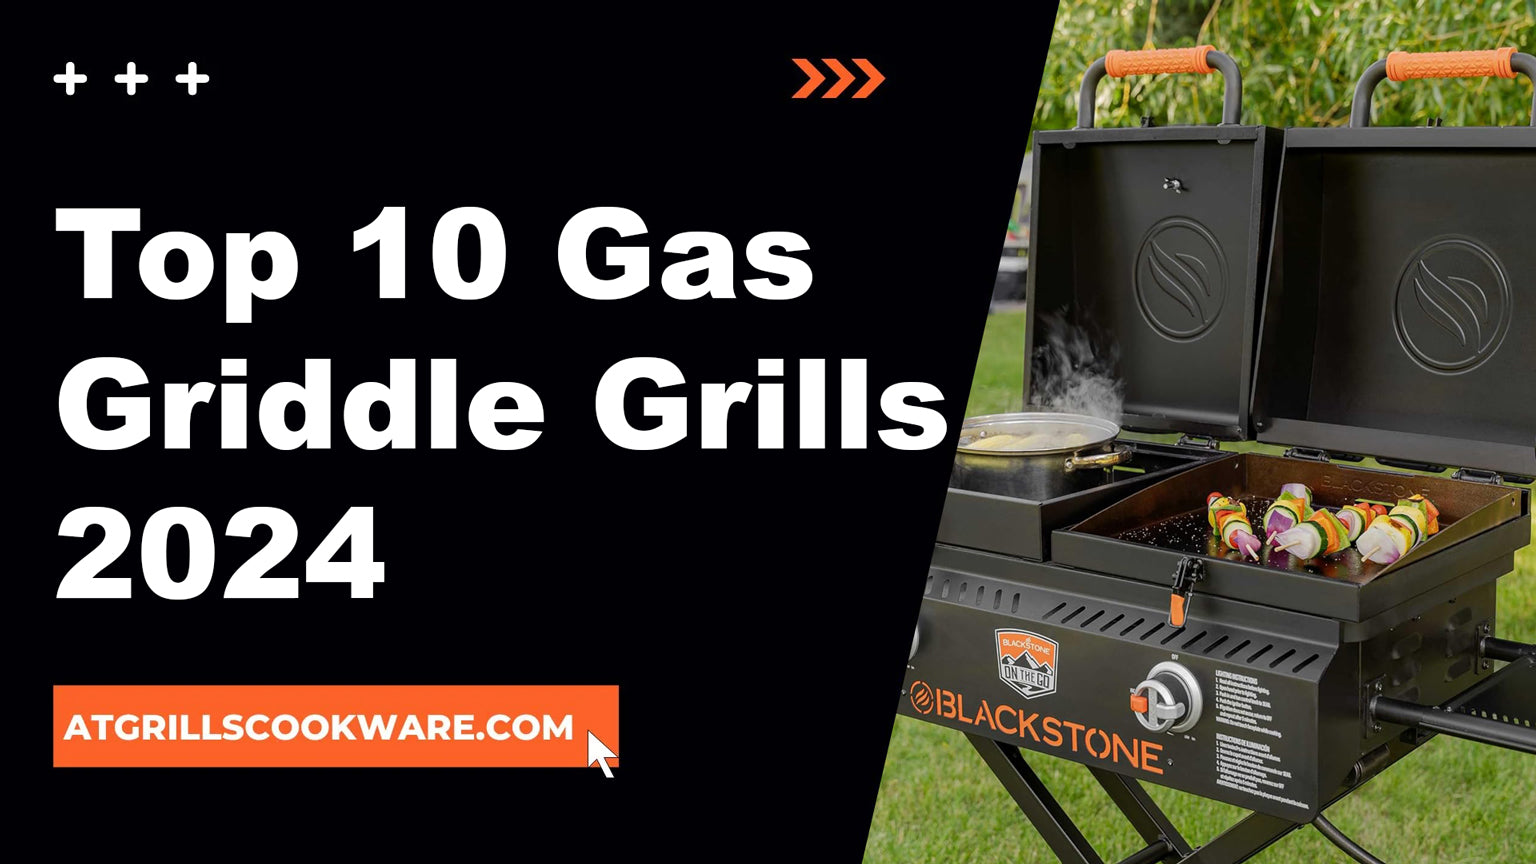 Top 10 Gas Griddle Grills 2024 ATGRILLS